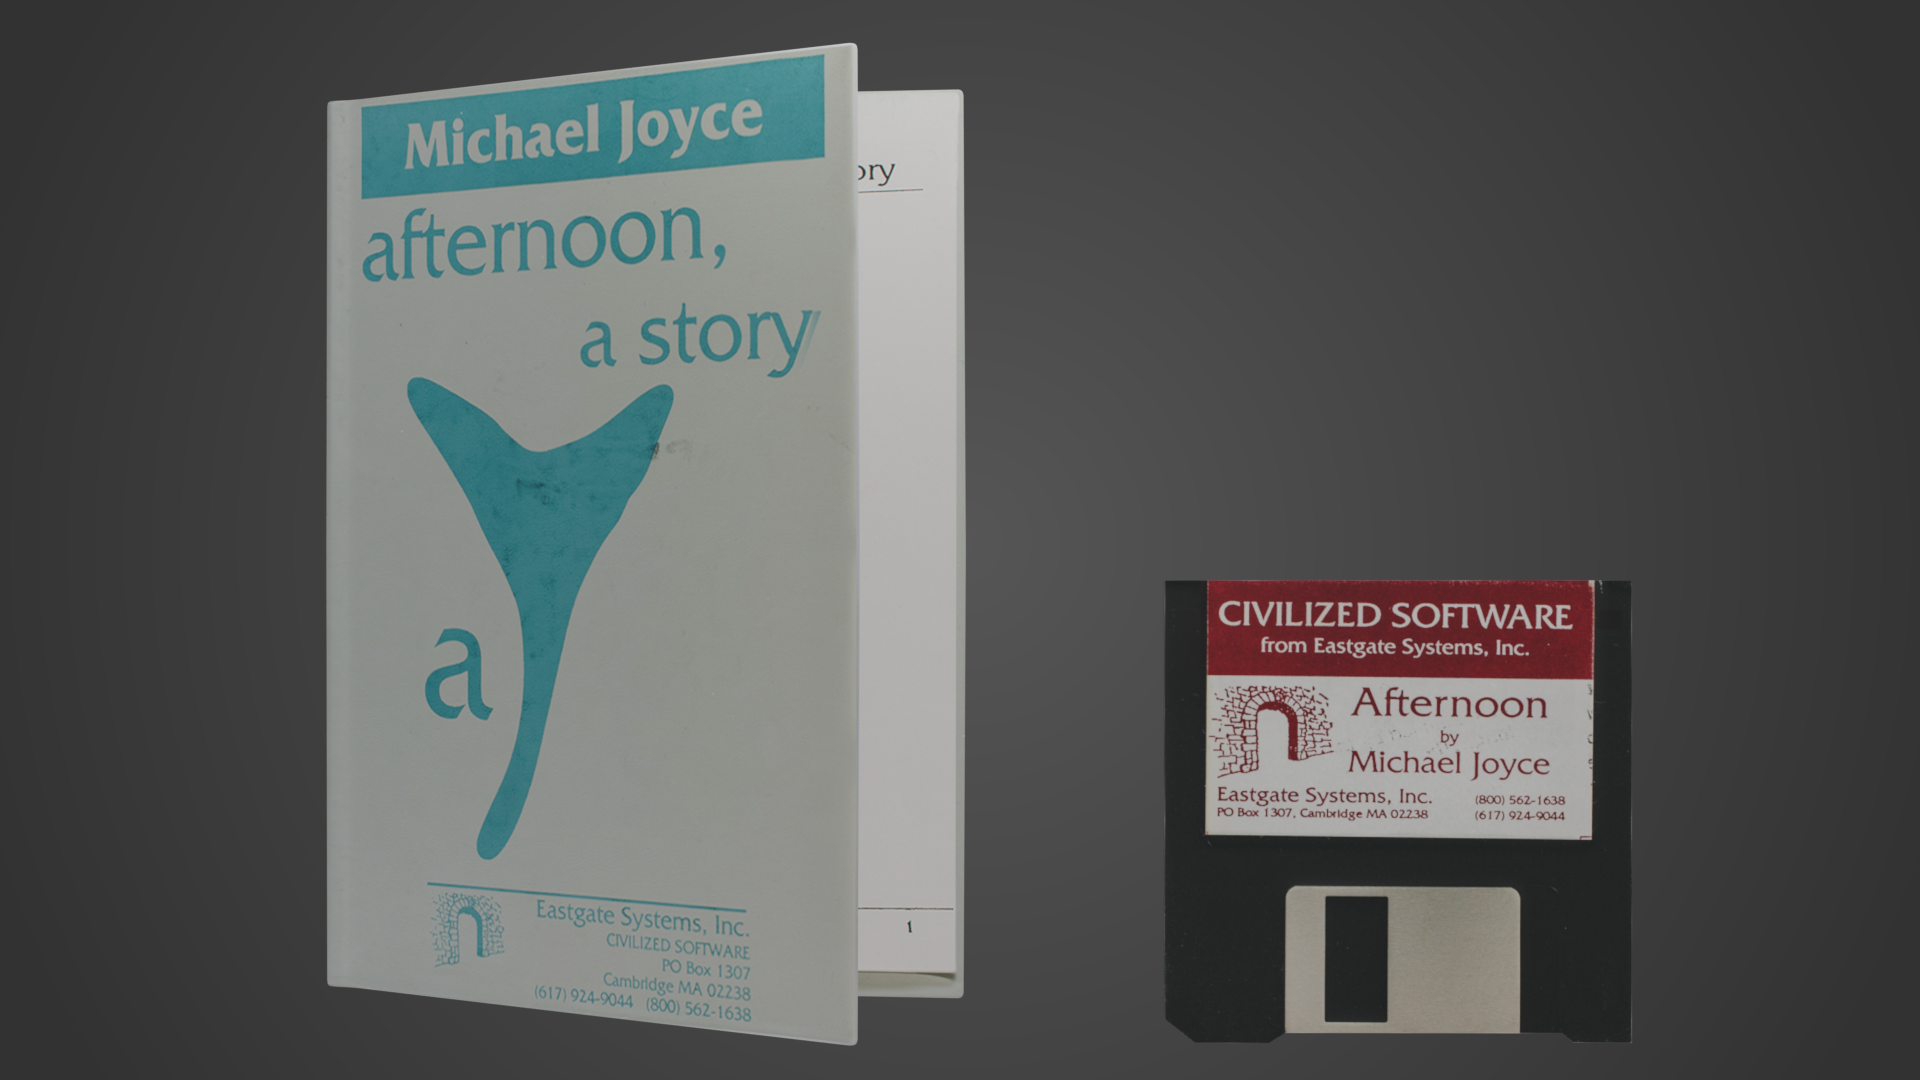 A 3D model of the afternoon, a story folio and floppy disk